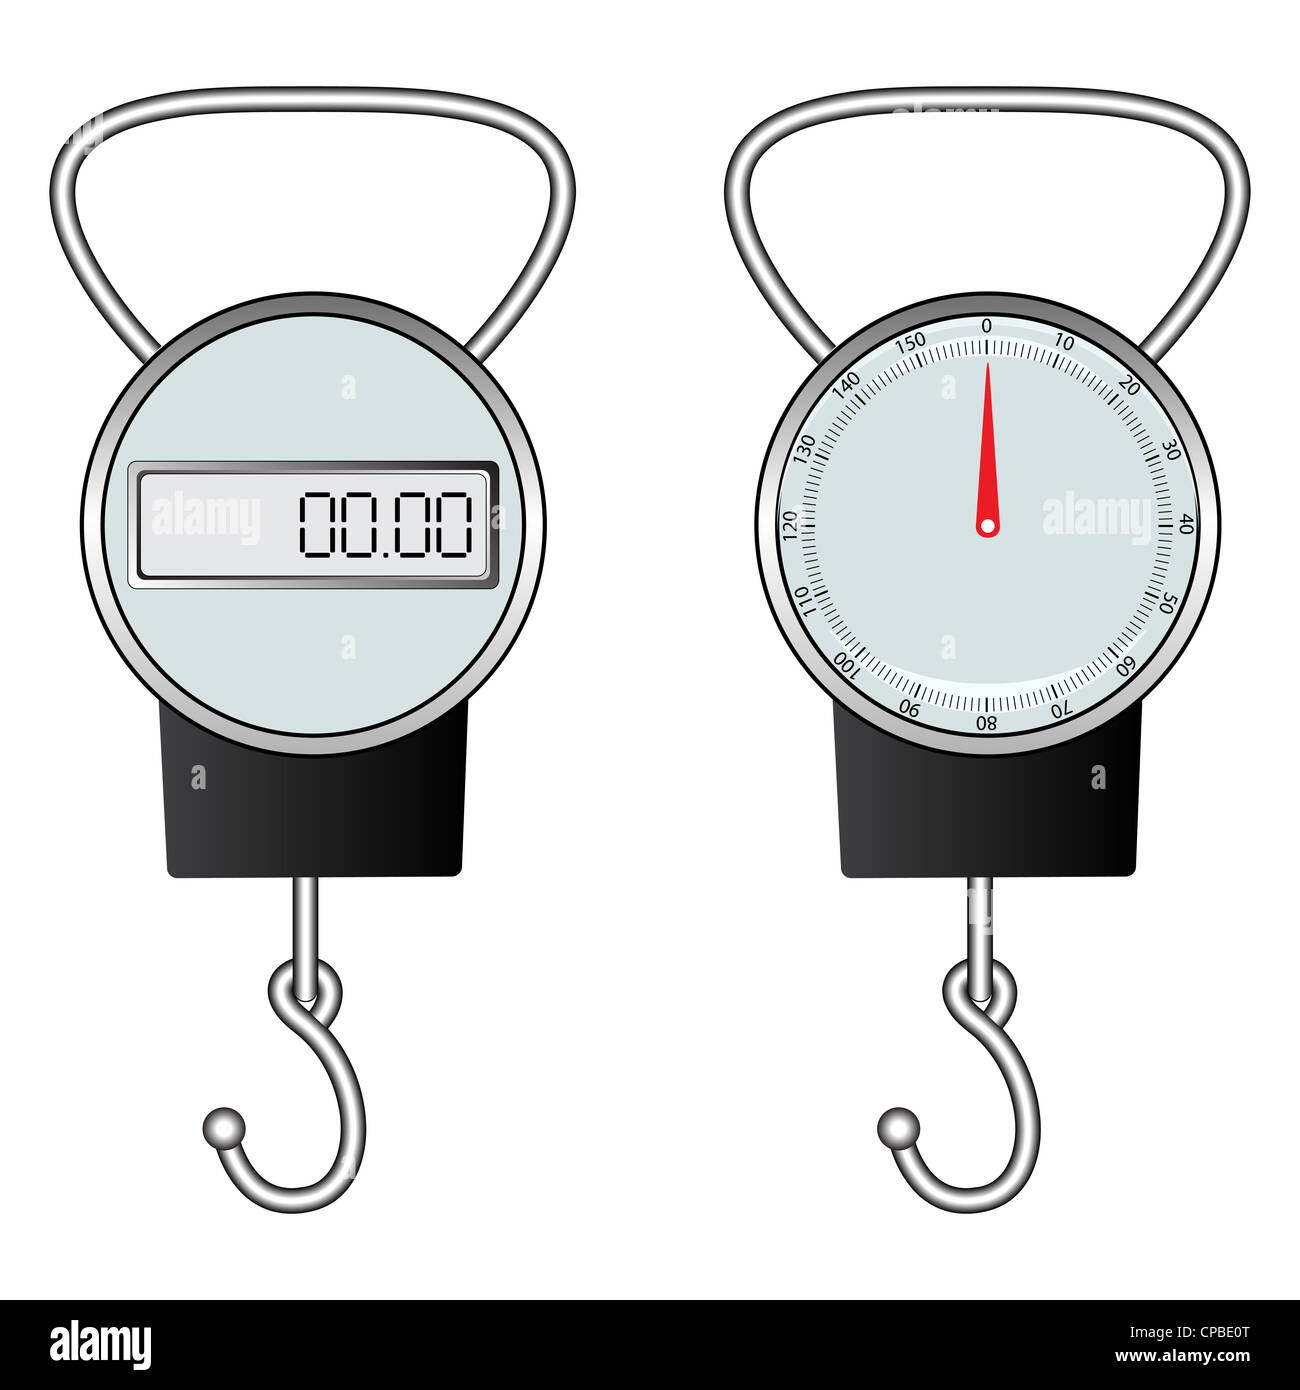 Portable hook scale with a digital display isolated on white. Mini  electronic hand scales for fishing, weighing luggage. Weight measuring tool  Stock Photo - Alamy